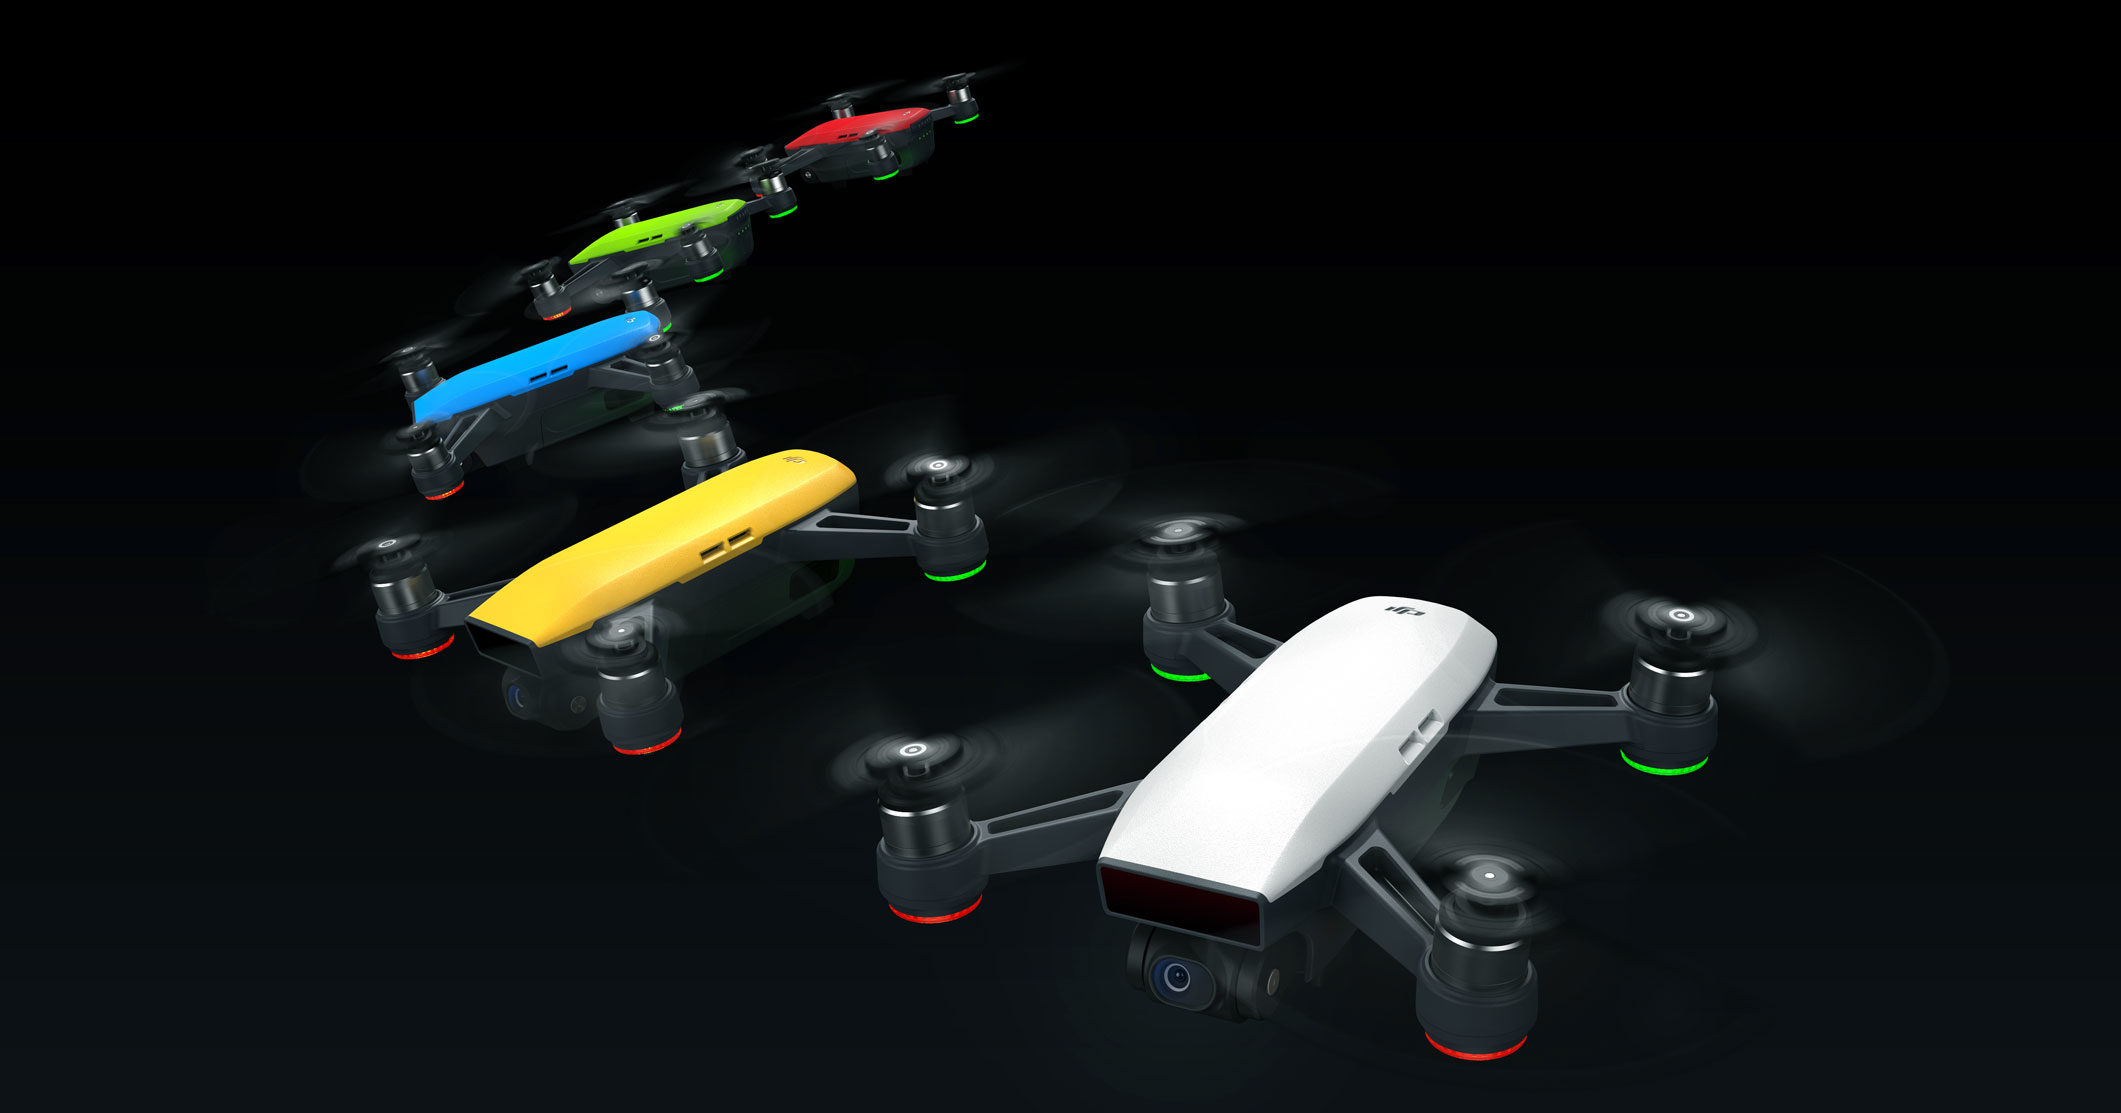  download DJI Spark Price Specs Release Date WIRED [2121x1113 2121x1113